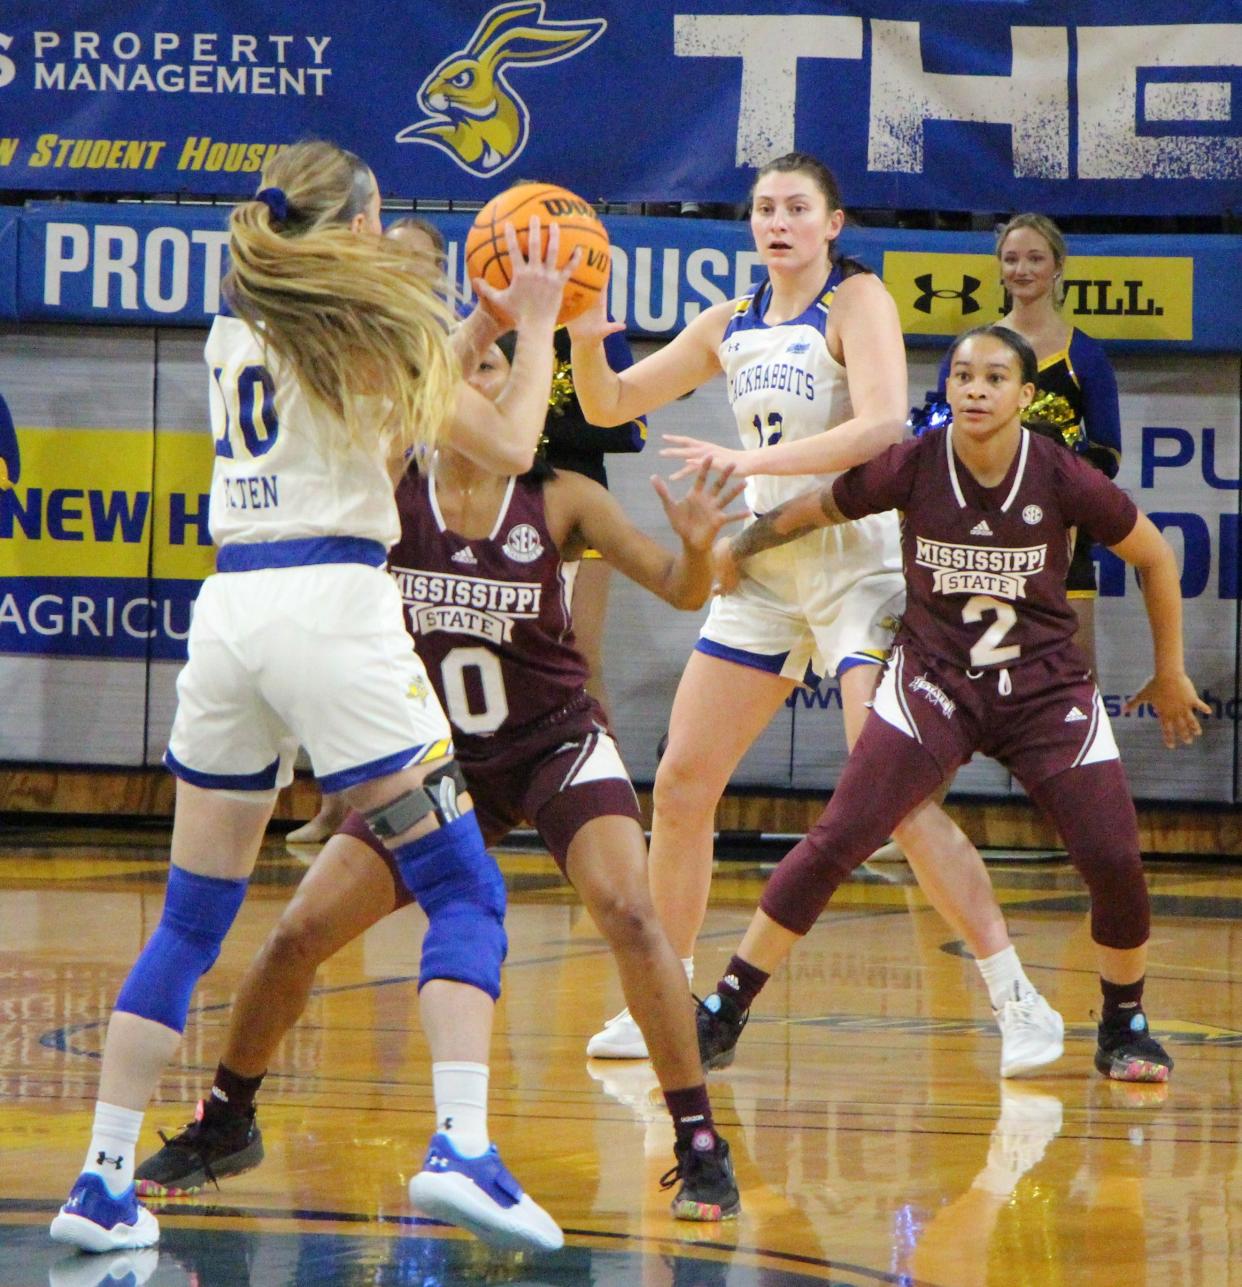 SDSU's Kallie Theisen posts up while Mississippi State's Jerkaila Jordan (2) defends on Monday night at Frost Arena.